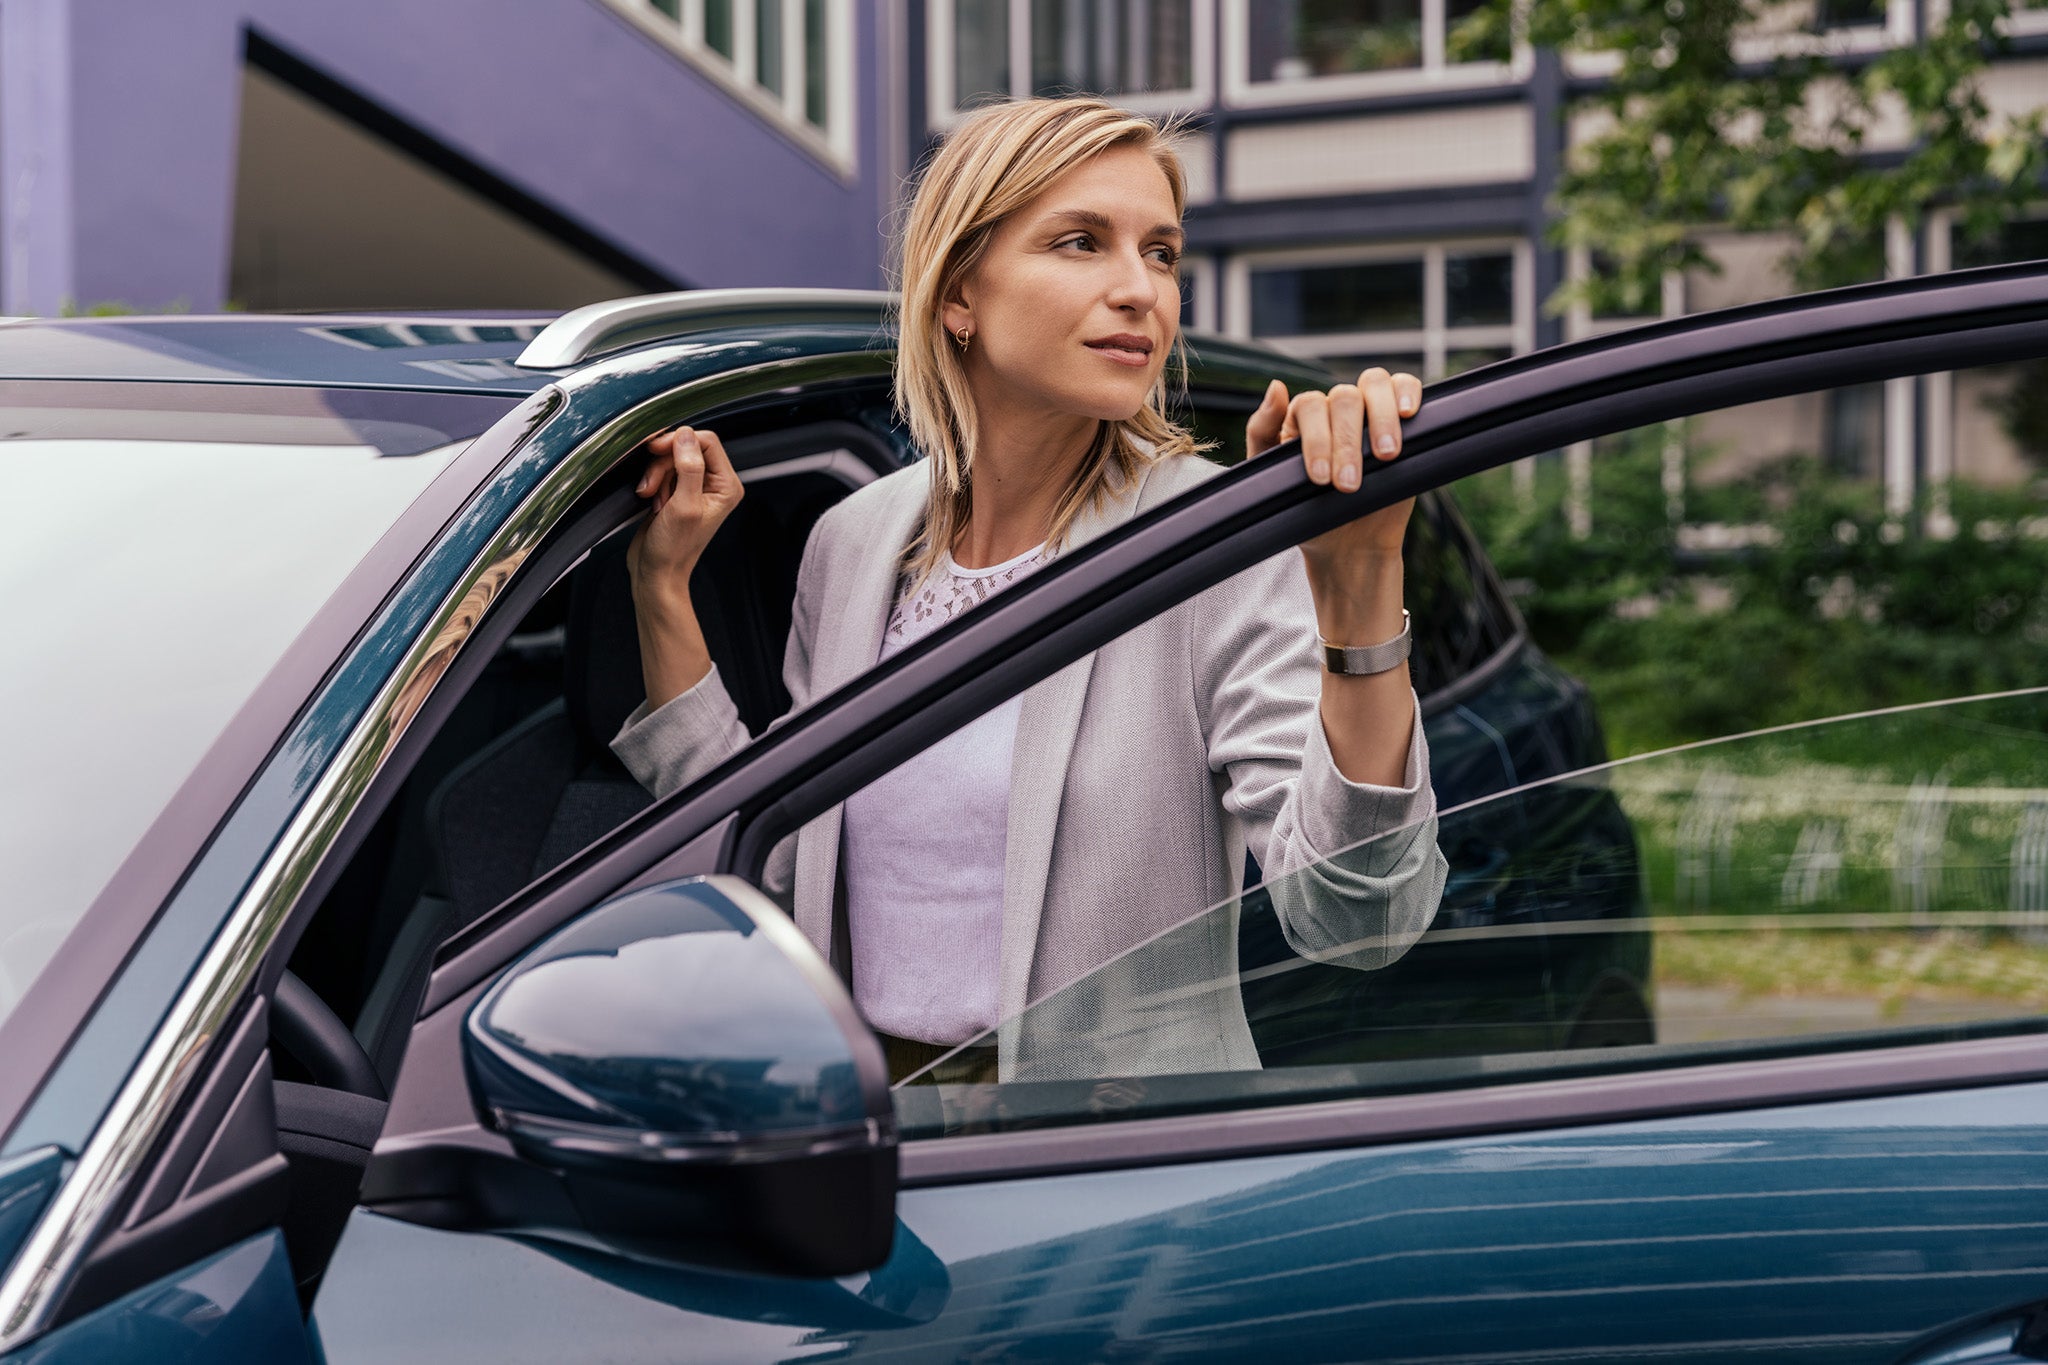 Woman leaning at open car door, Cologne, NRW, Germany